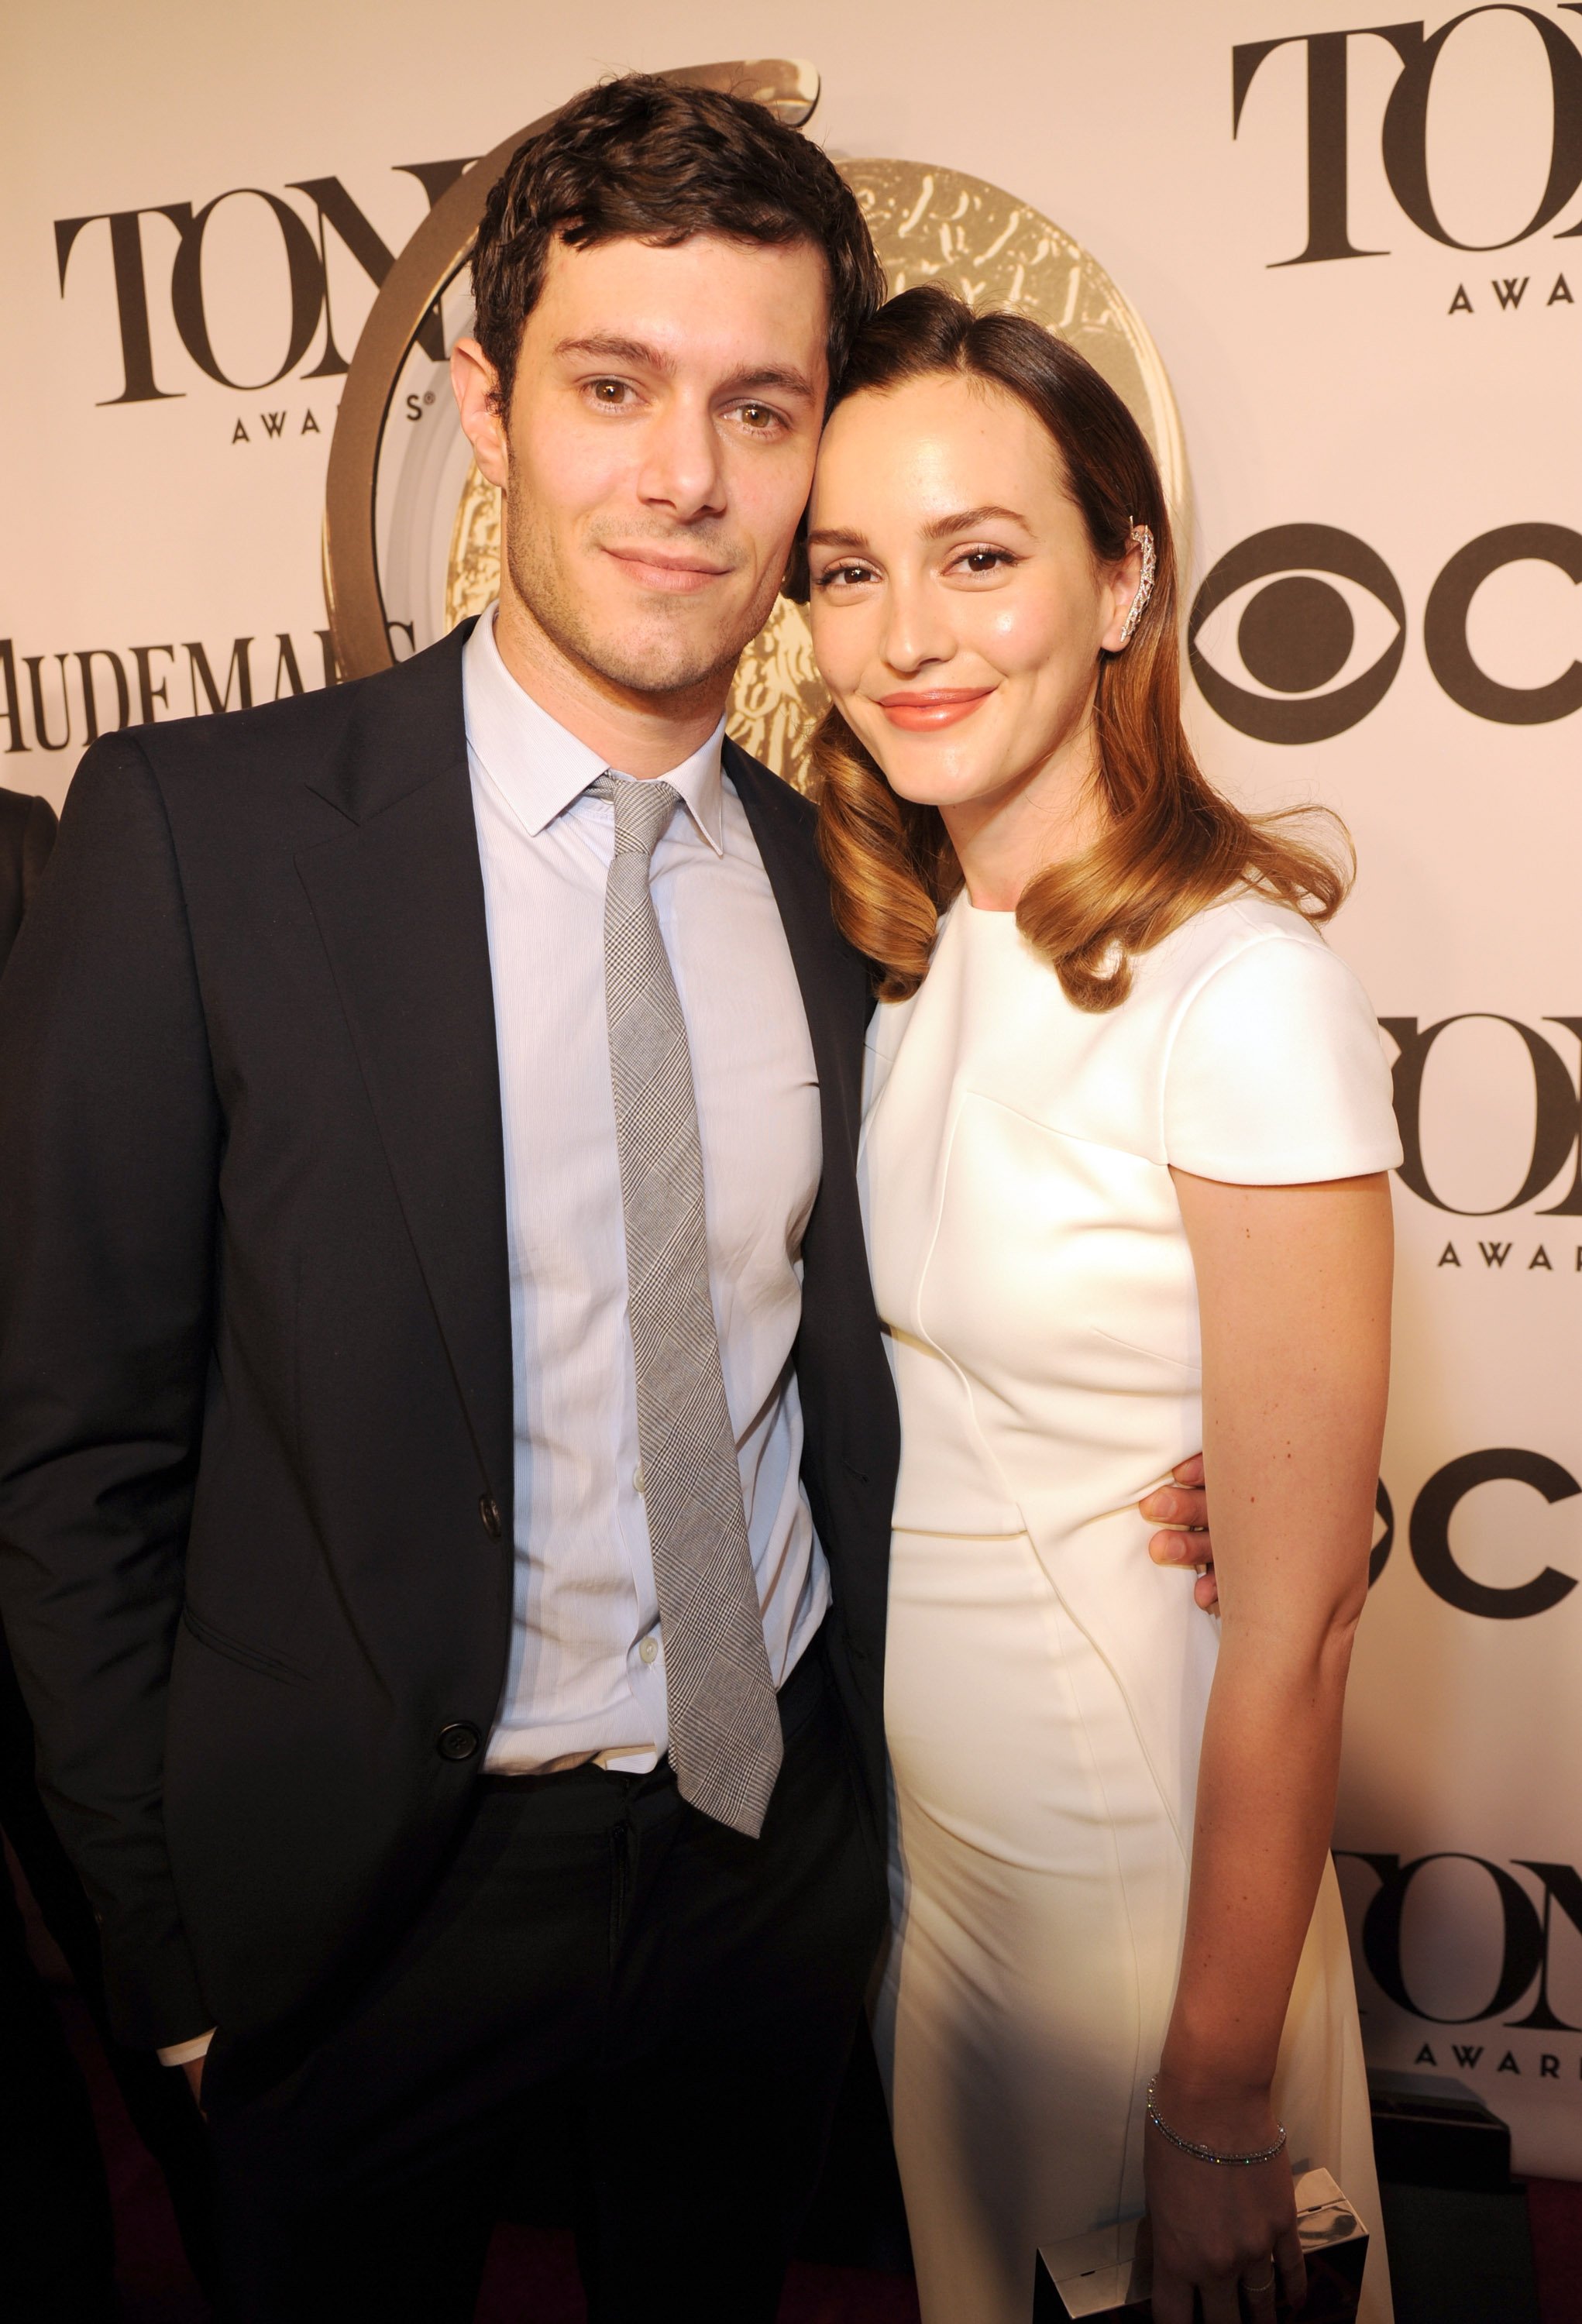 Adam Brody und Leighton Meester bei den 68th Annual Tony Awards des American Theatre Wing, Juni 2014 | Quelle: Getty Images